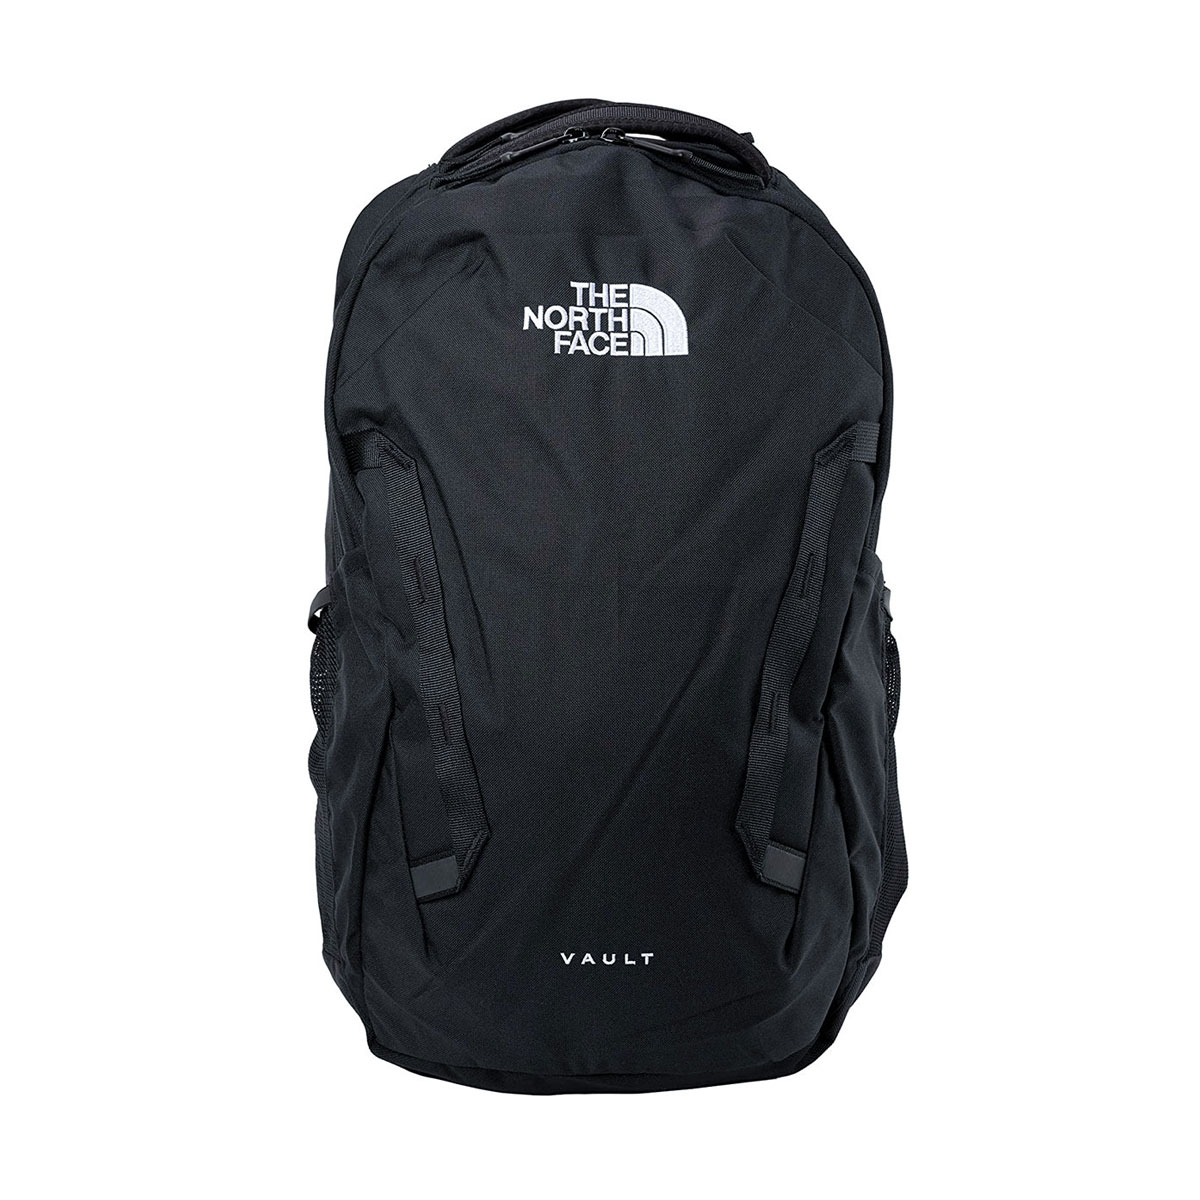 THE NORTH FACE ザ リュックサック ヴォルト VAULT BACKPACK NF0A3...